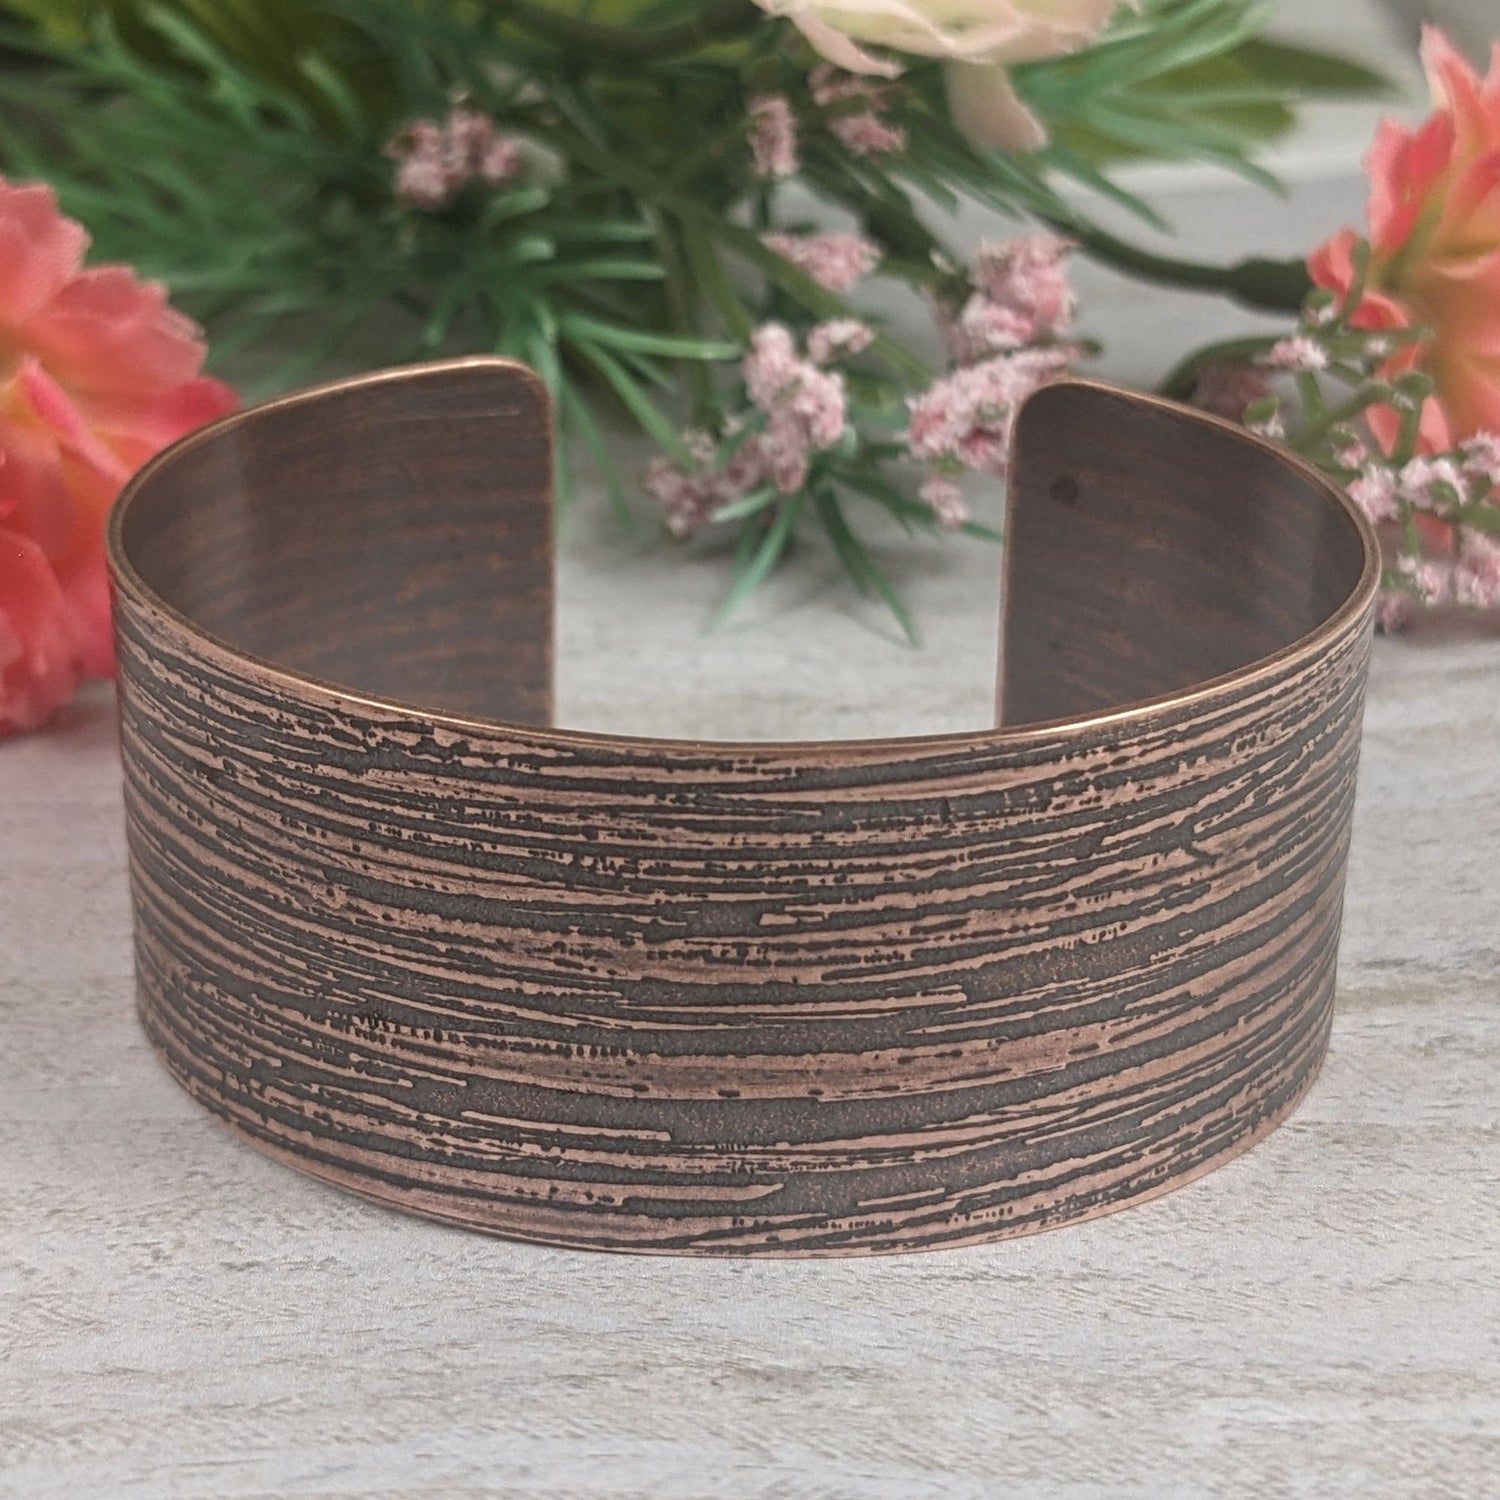 One inch wide copper cuff bracelet with an impressed texture that resembles raw silk fabric. The texture is horizontal and covers the entire cuff.